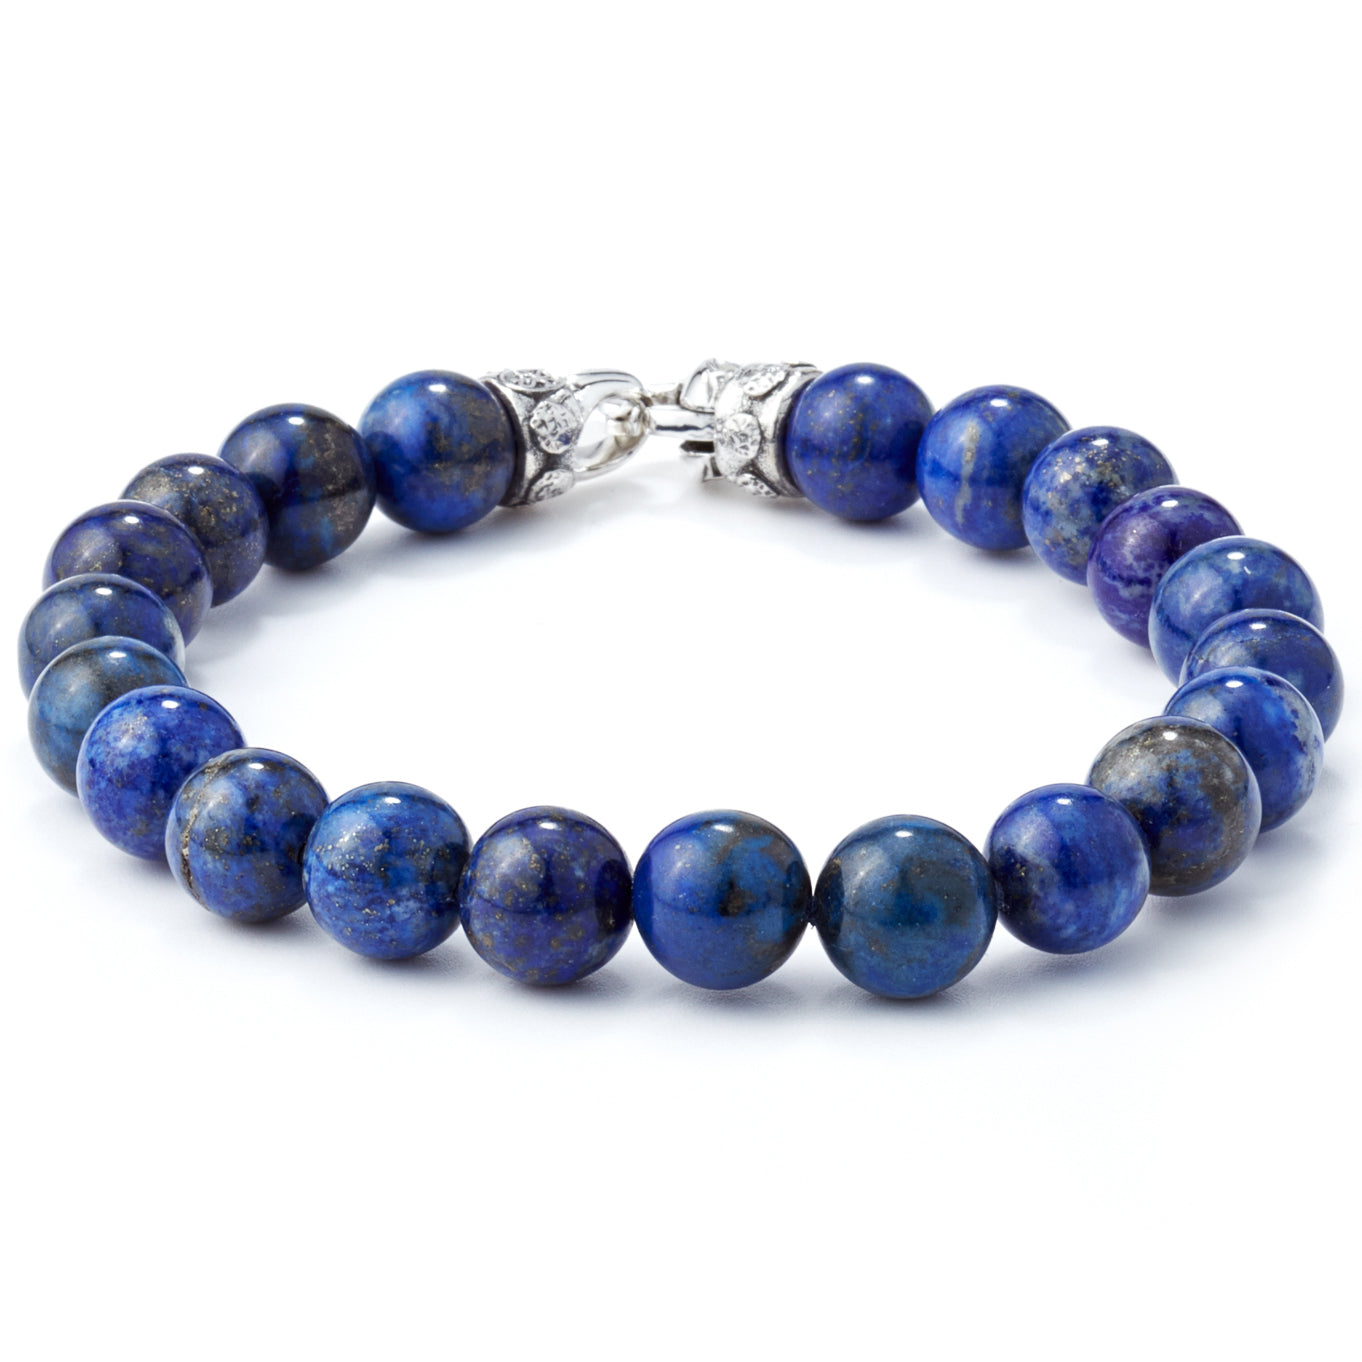 Scott Kay Men's Blue Bracelet, 8mm Lapis Lazuli Beads with Sterling Silver Engraved Clasp, 8 Inches